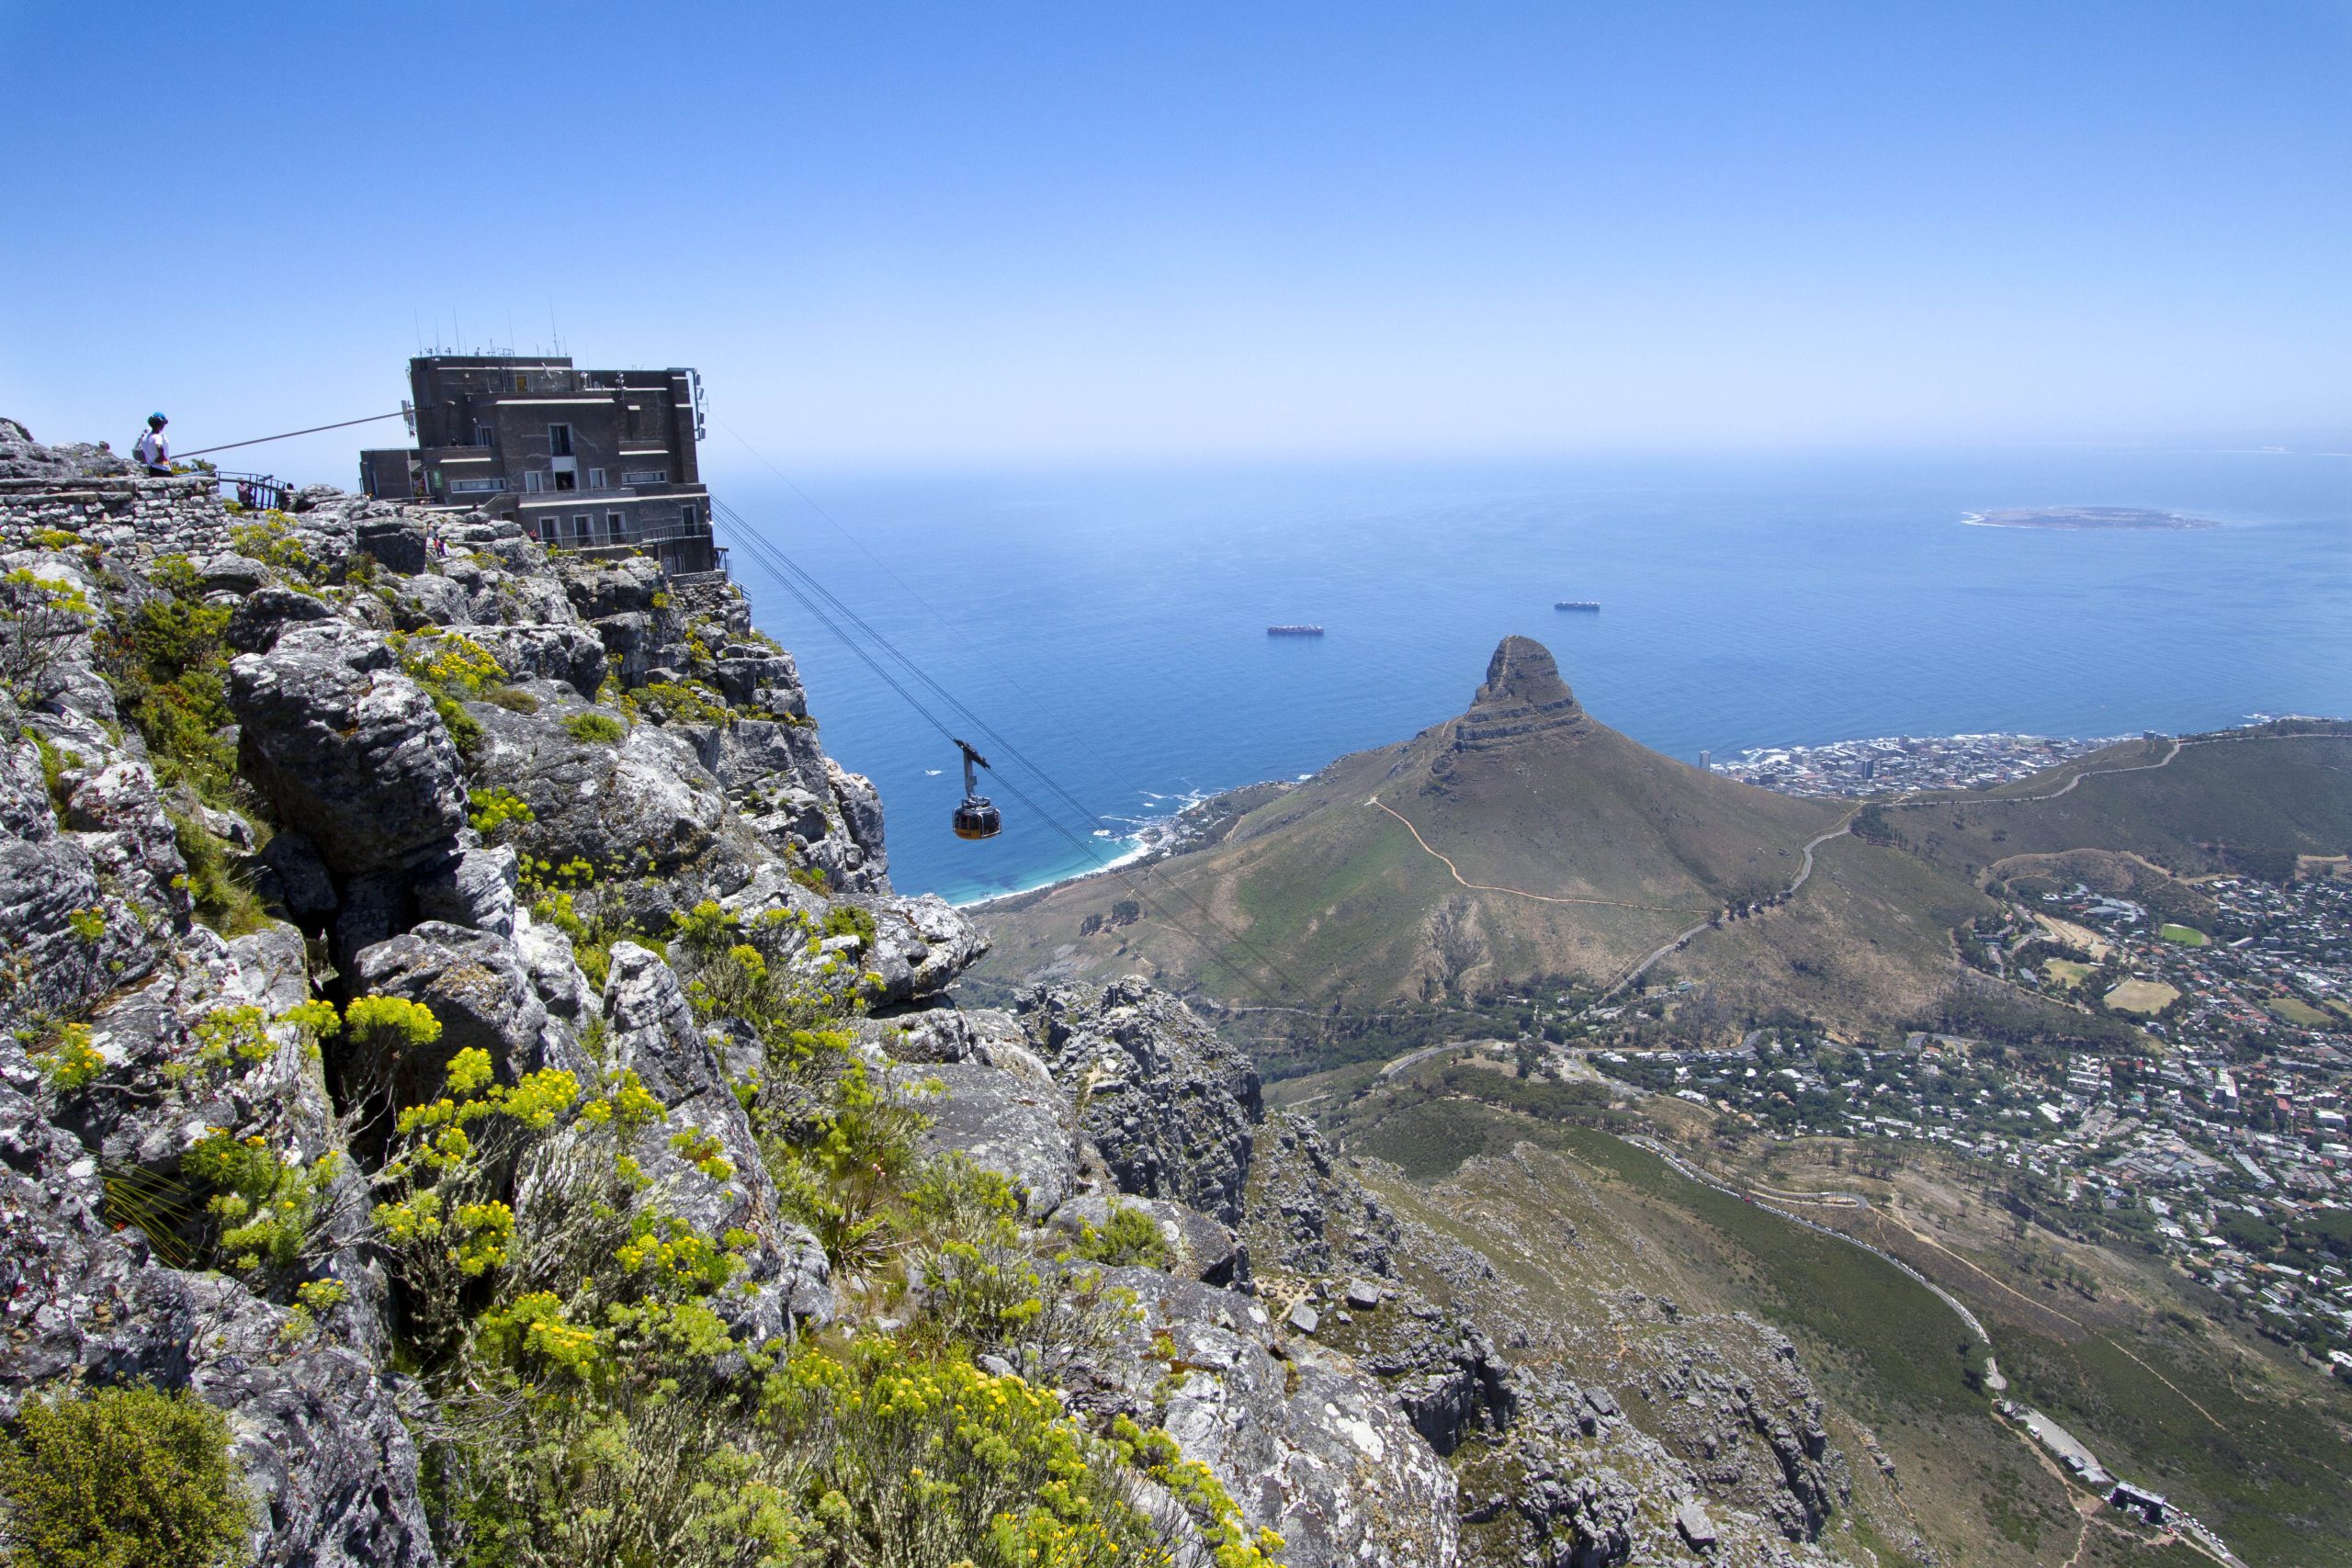 A view of the cablecar taking visitors to and from the Table Mountain above Cape Town, South Africa